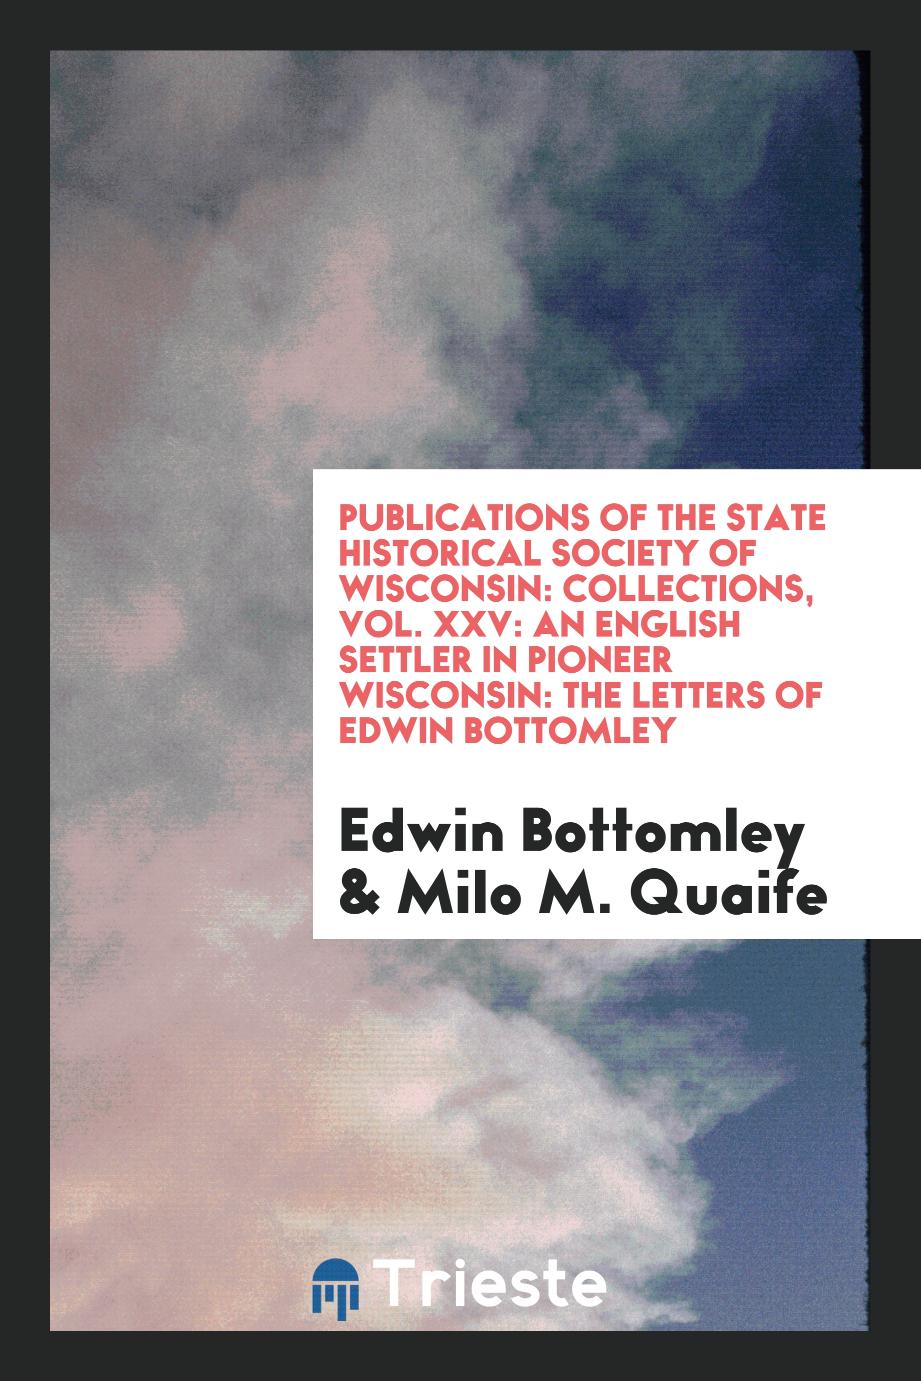 Publications of the State Historical Society of Wisconsin: Collections, Vol. XXV: An English Settler in Pioneer Wisconsin: The Letters of Edwin Bottomley